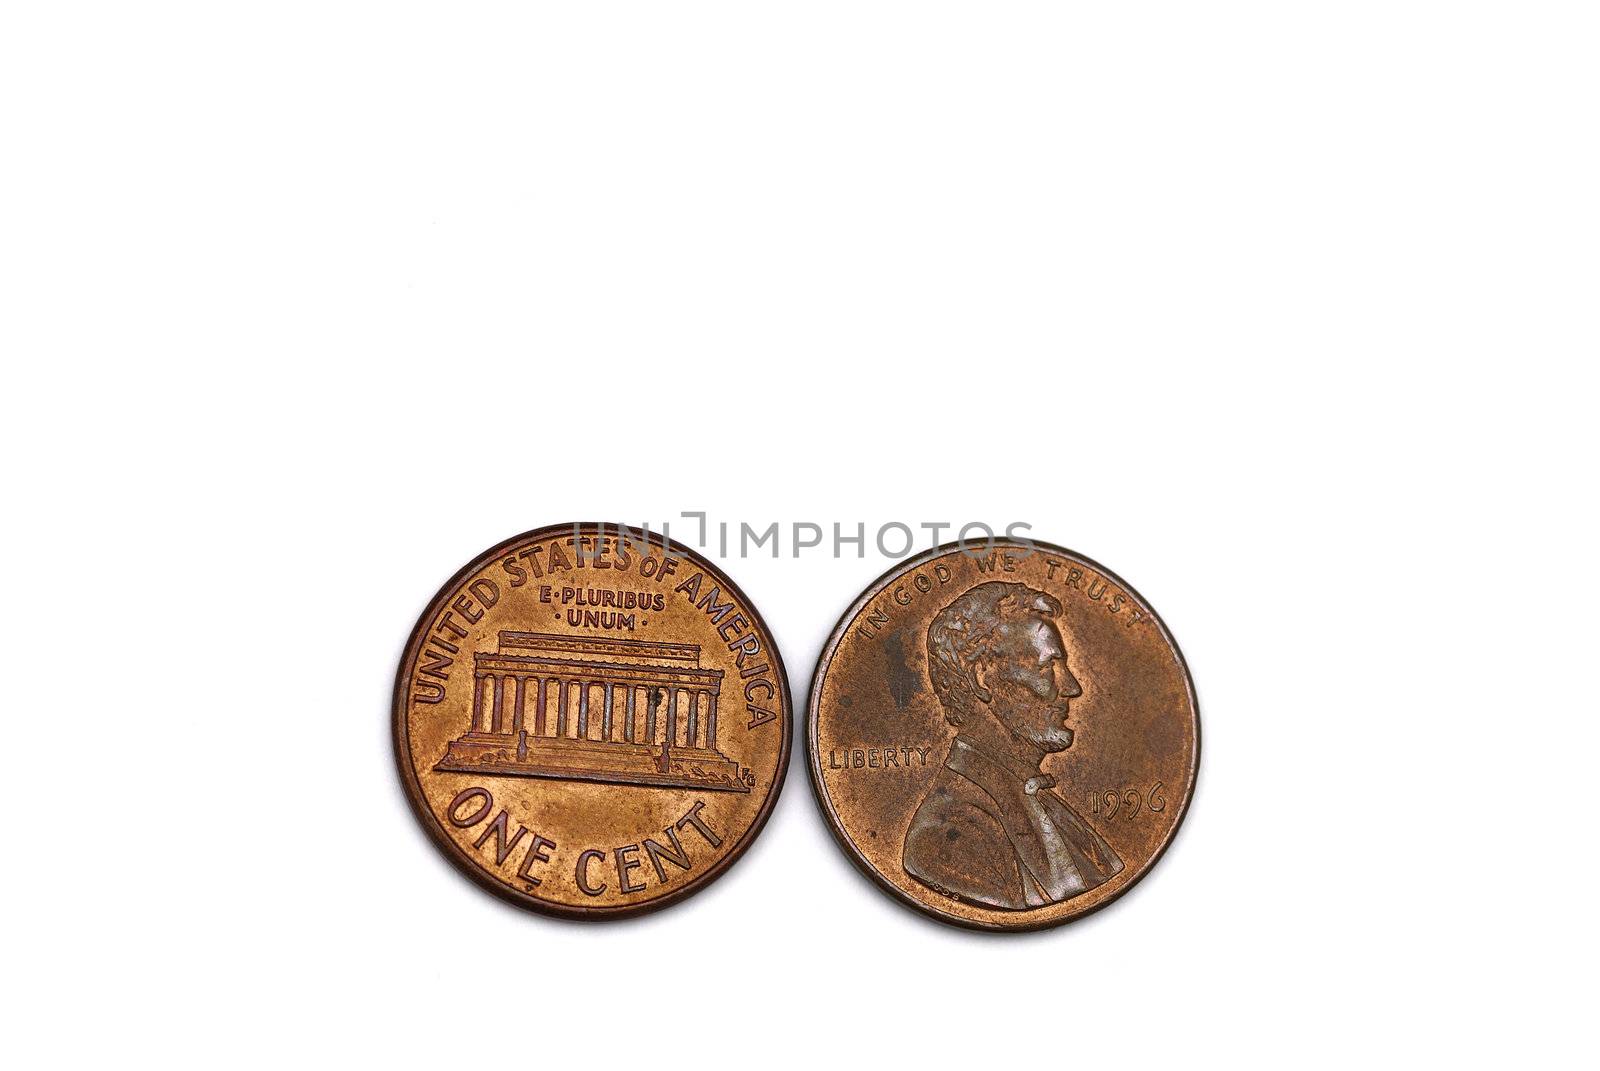 Two cents isolated on white background concept of idea